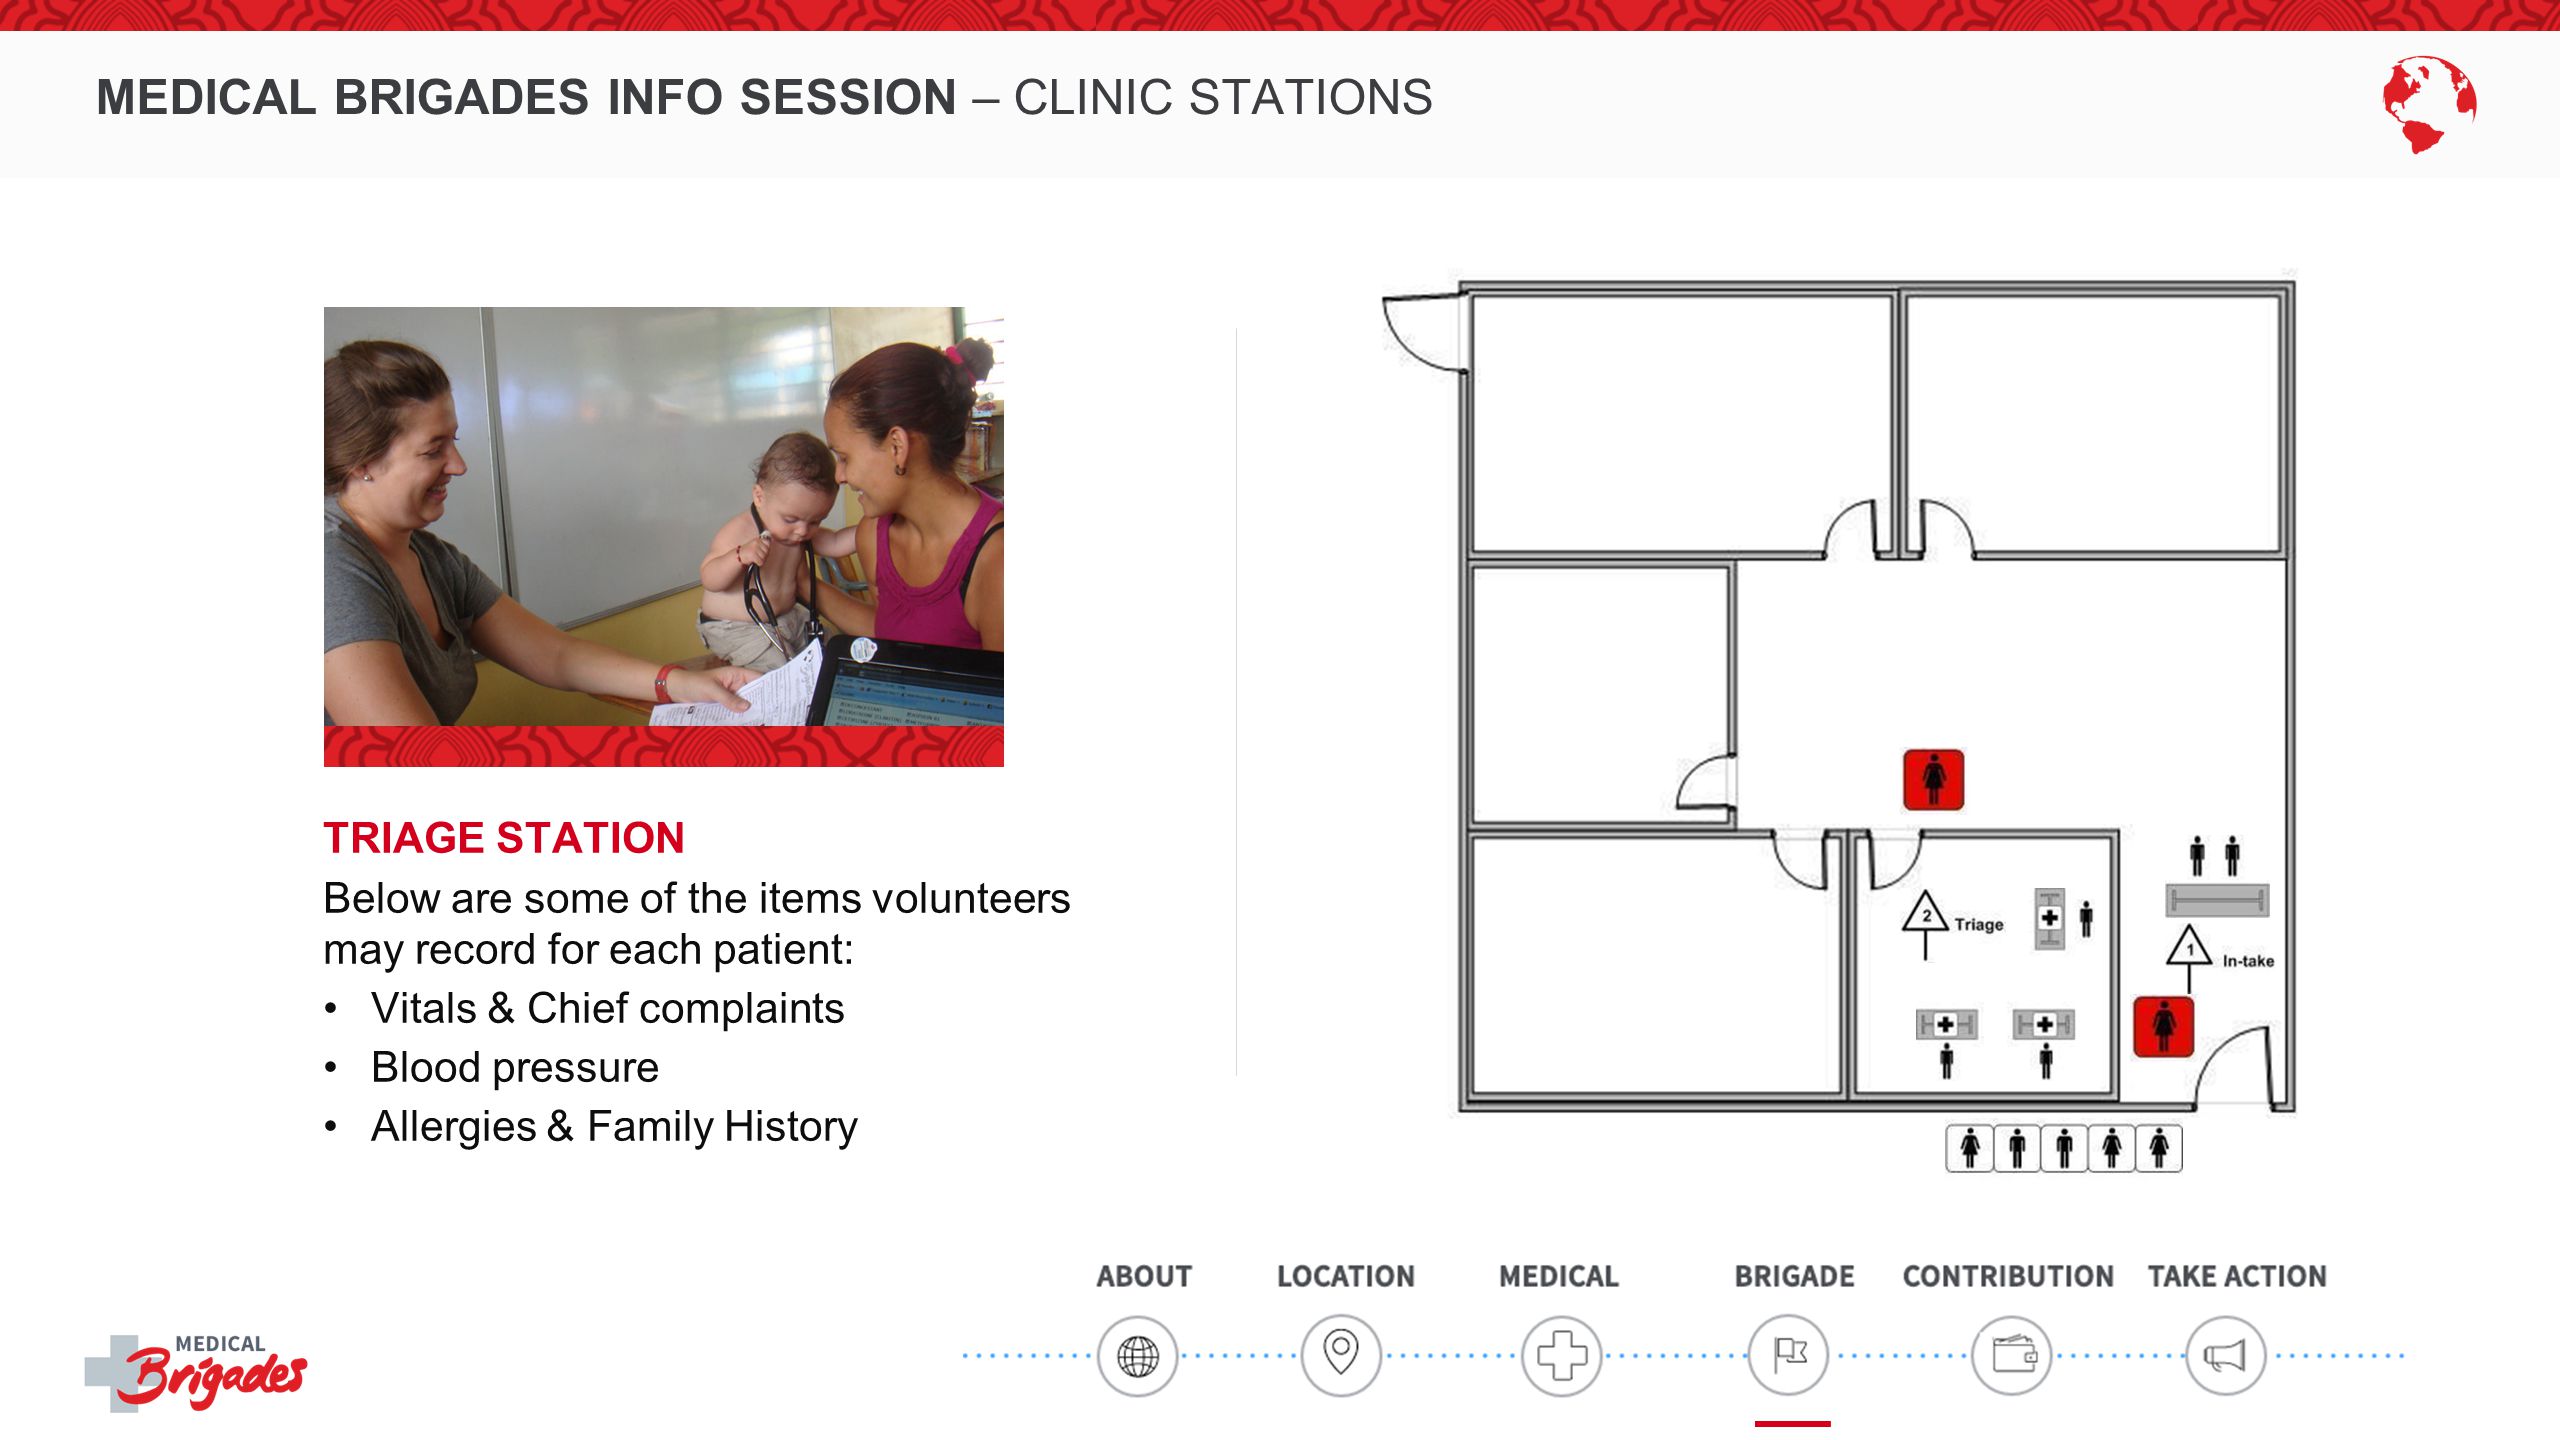 MEDICAL BRIGADES INFO SESSION – CLINIC STATIONS TRIAGE STATION Below are some of the items volunteers may record for each patient: Vitals & Chief complaints Blood pressure Allergies & Family History